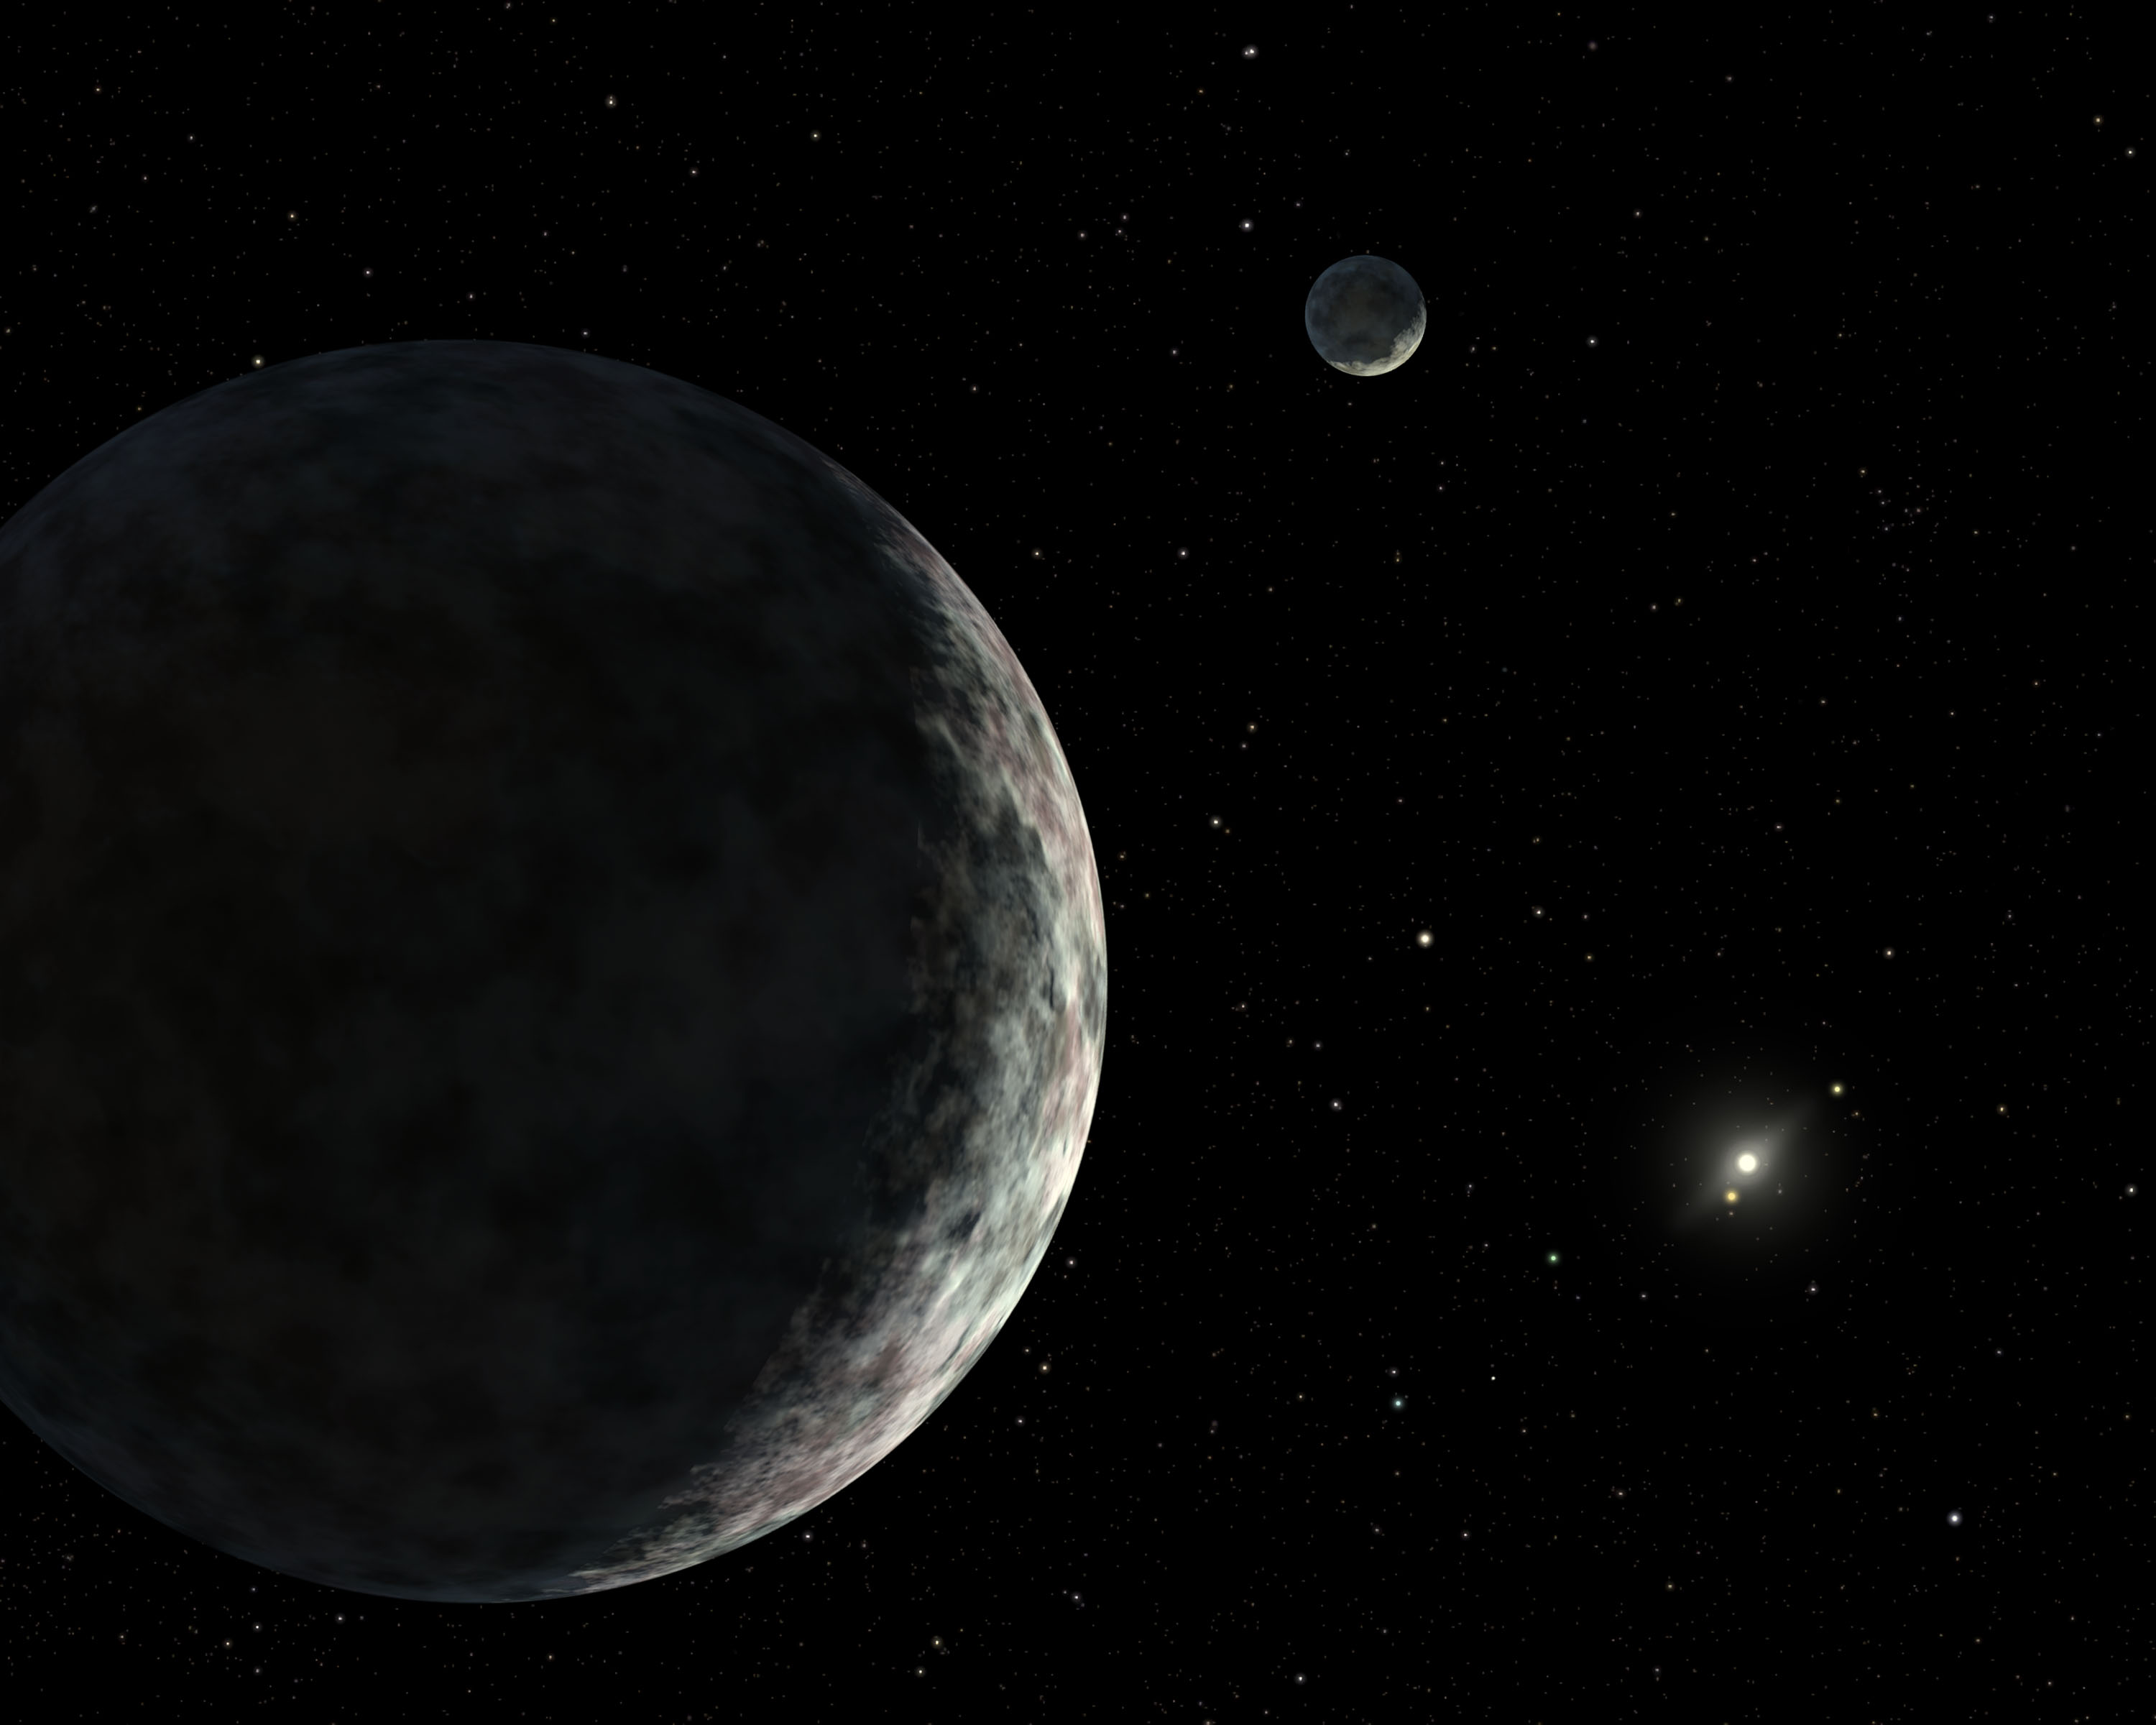 dwarf planets of the distances and sizes